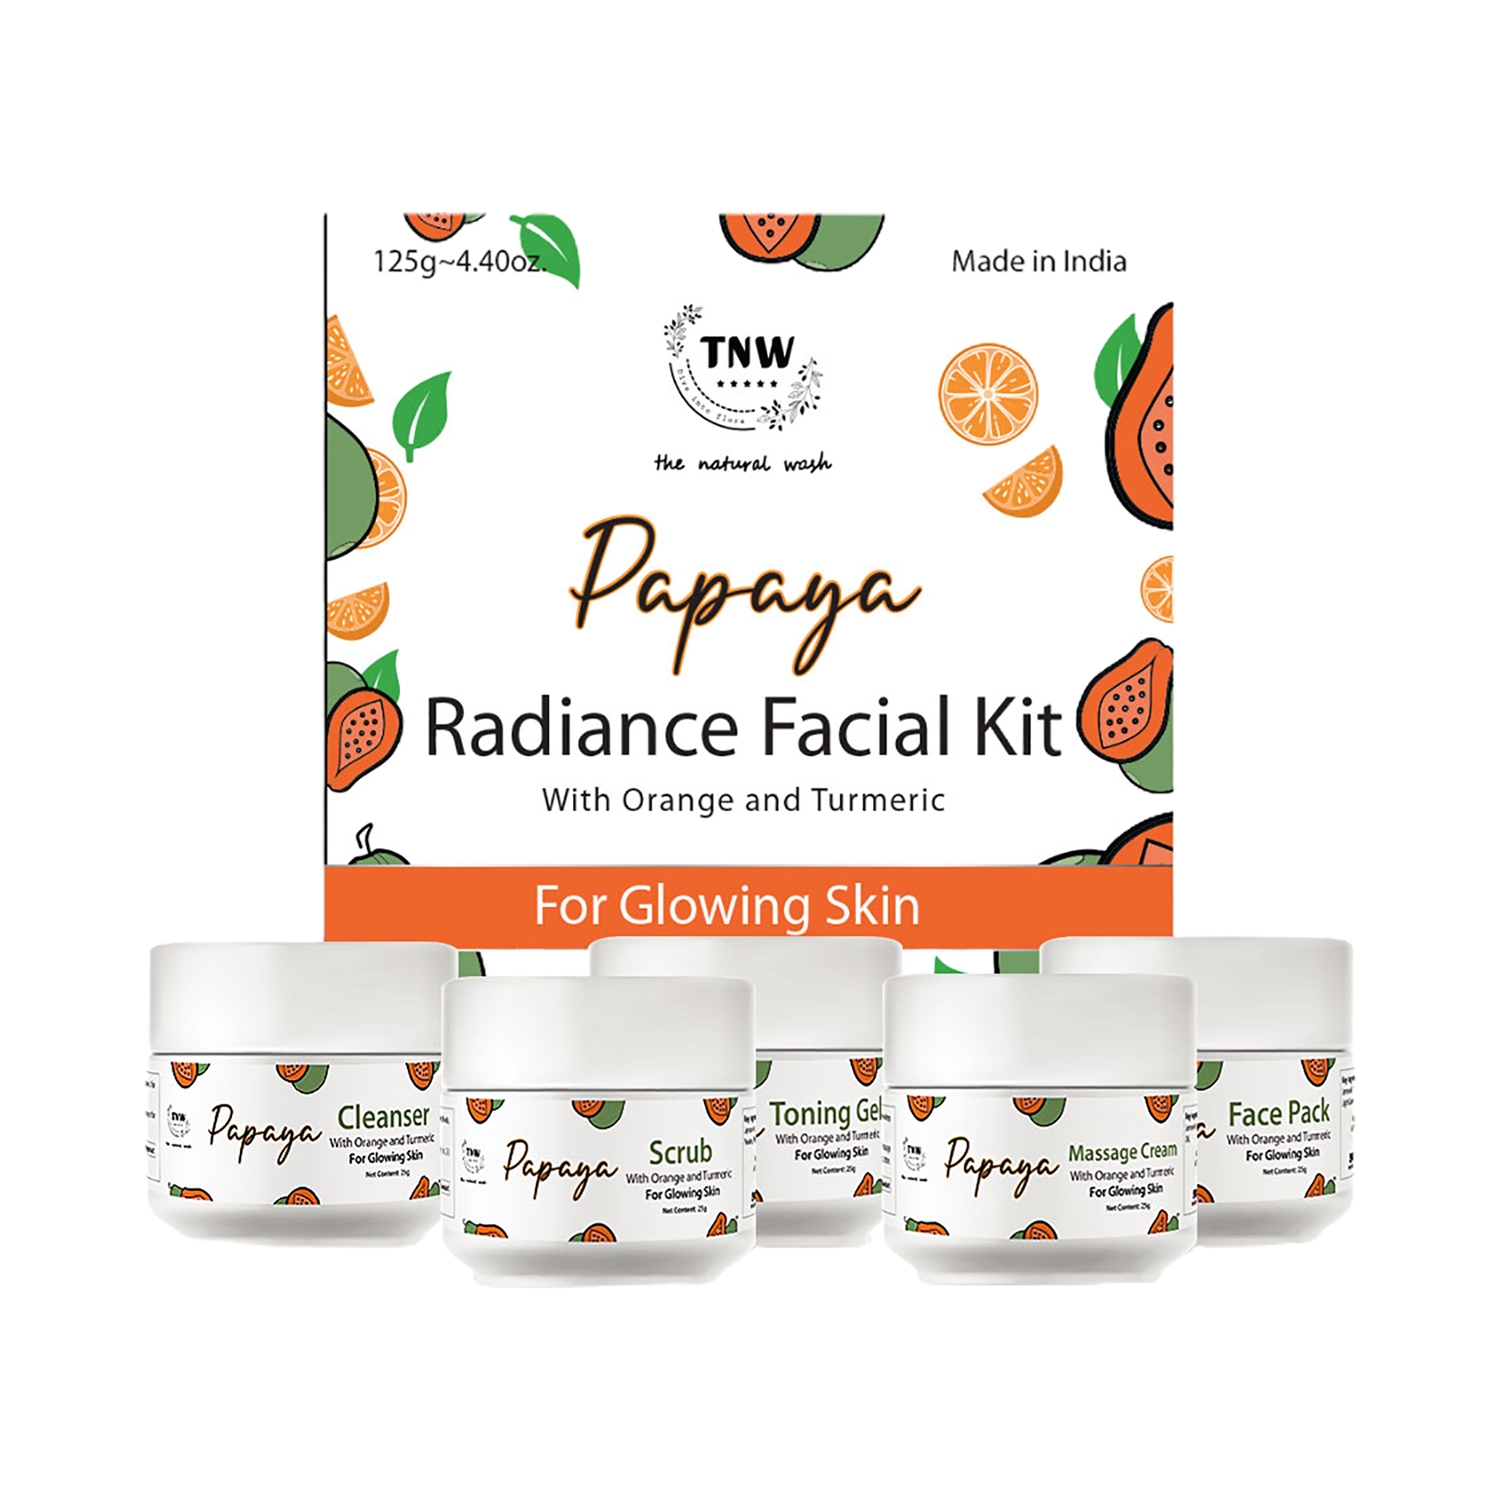 TNW The Natural Wash | TNW The Natural Wash Papaya Radiance Facial Kit With Orange And Turmeric Extracts (125g)